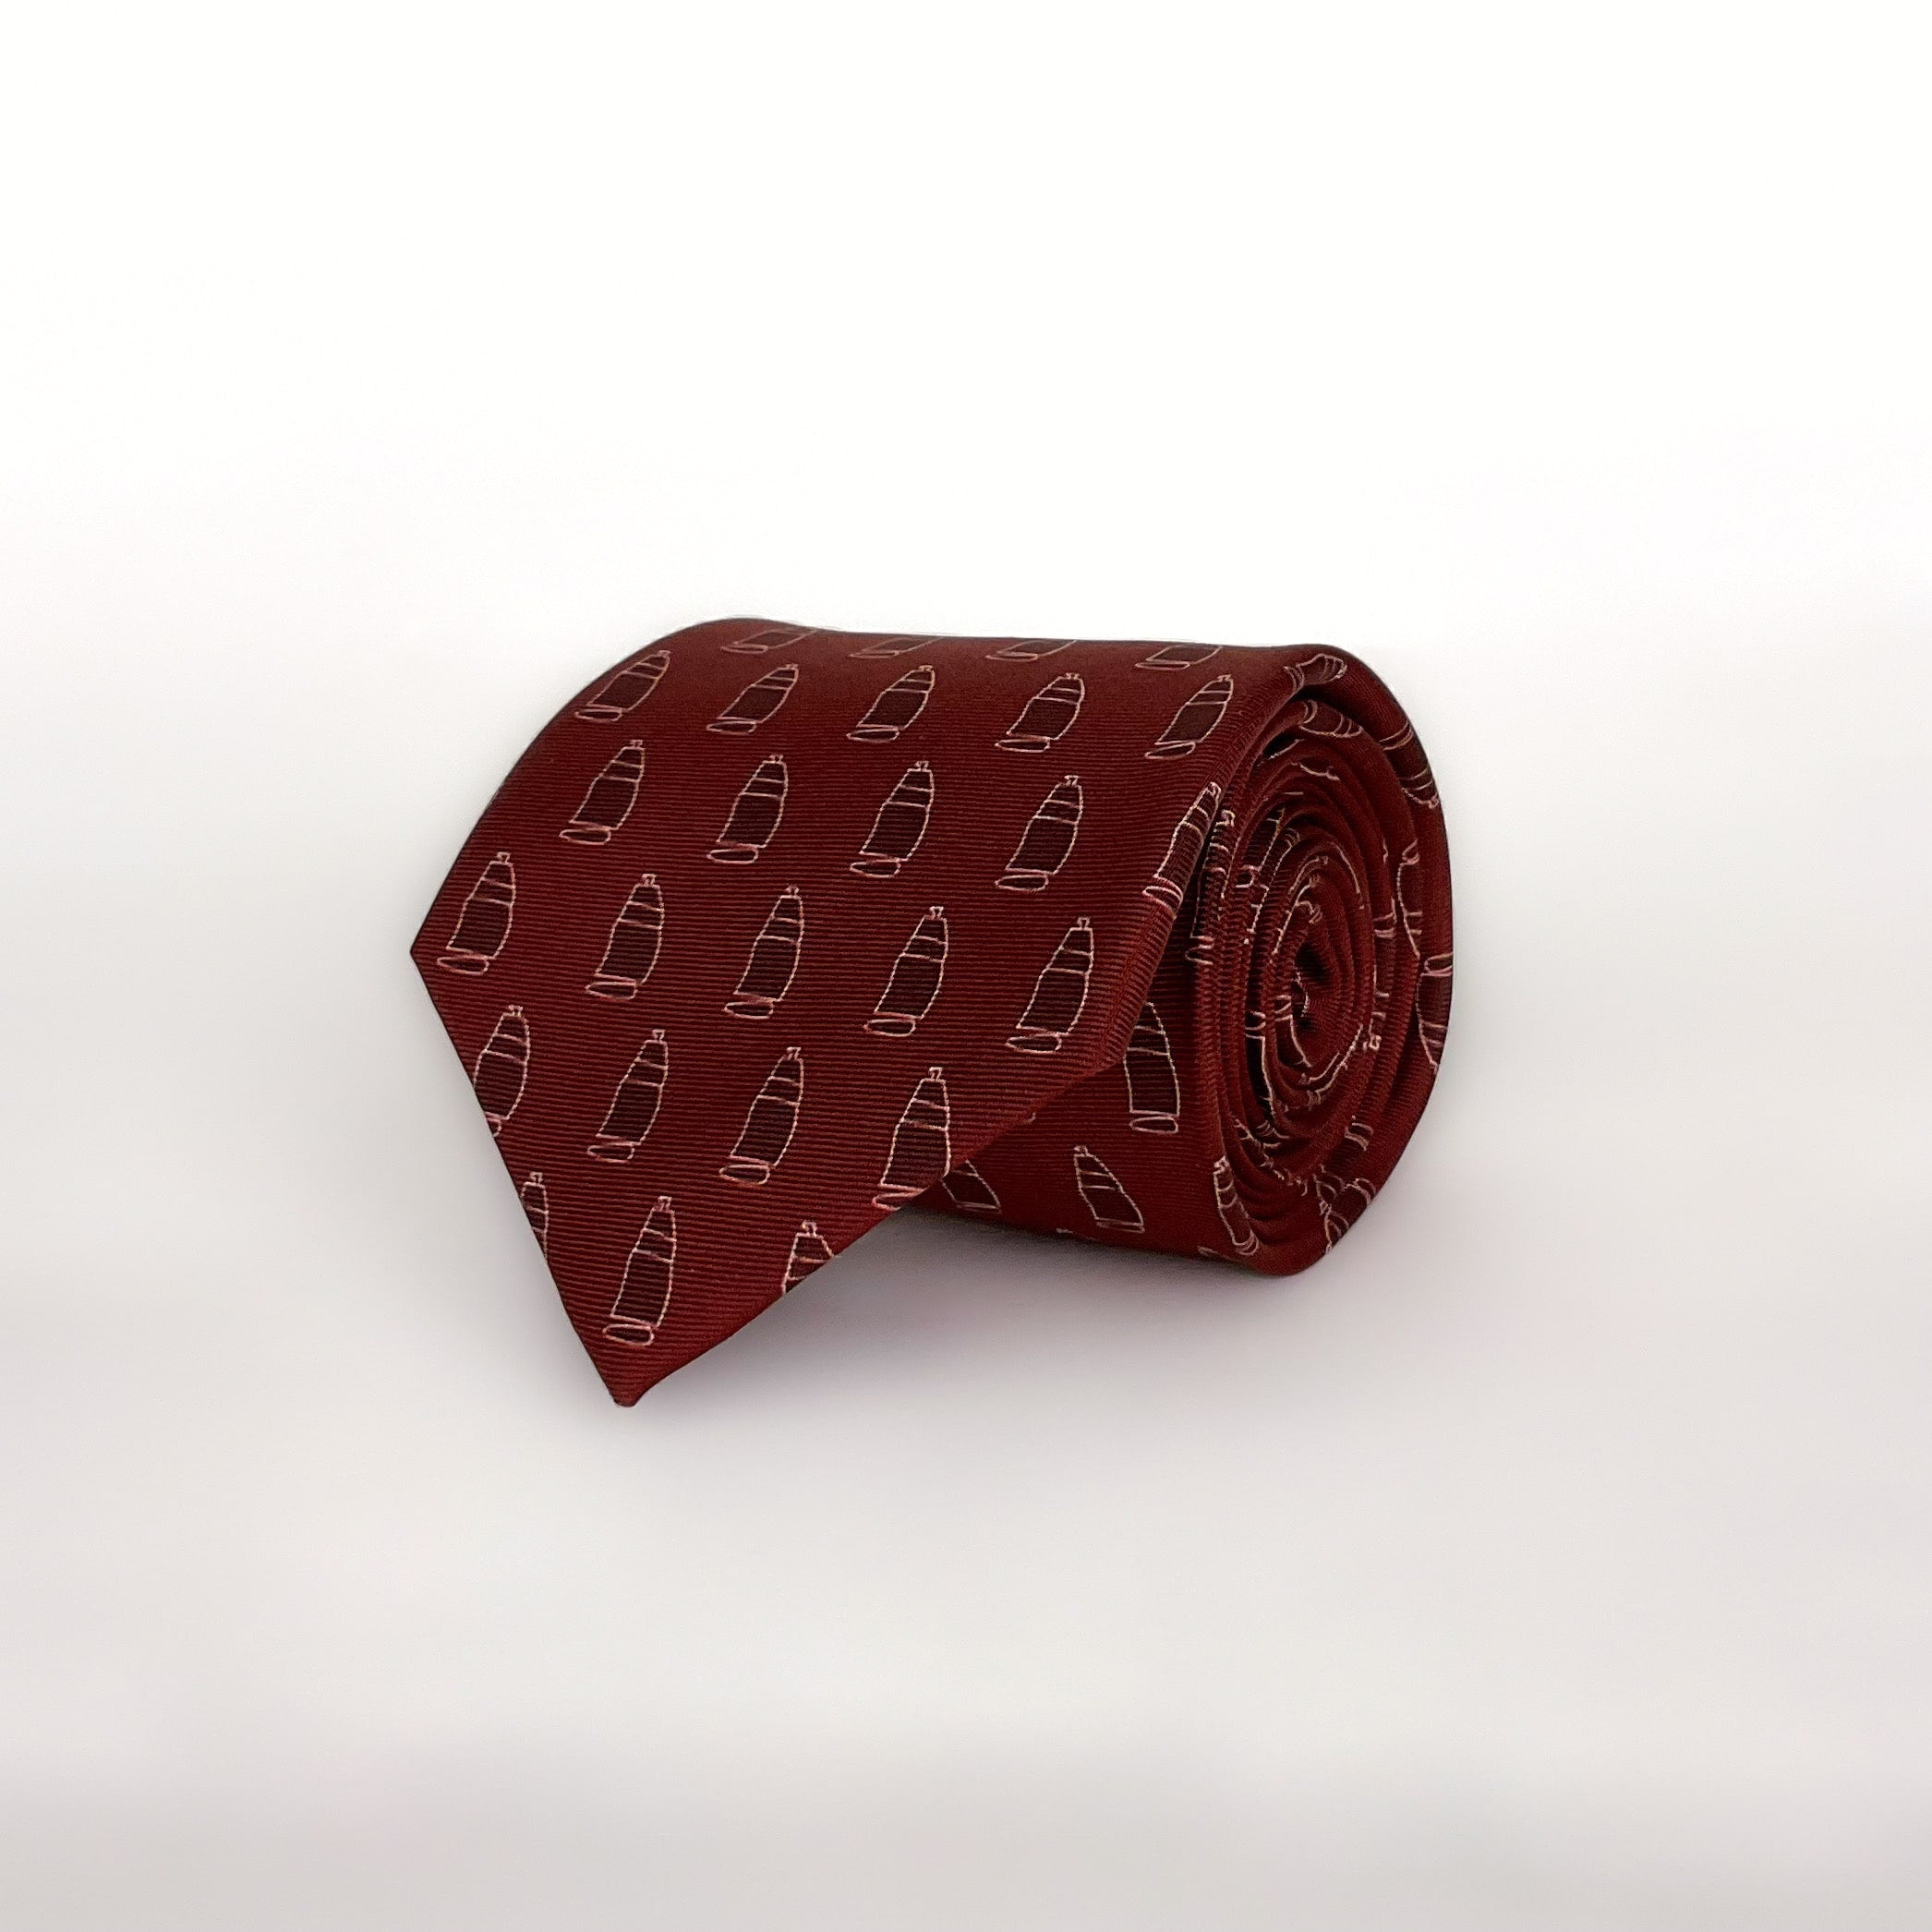 A burgundy red tie with a pattern of ships printed on it. The tie is rolled and placed on a white background.